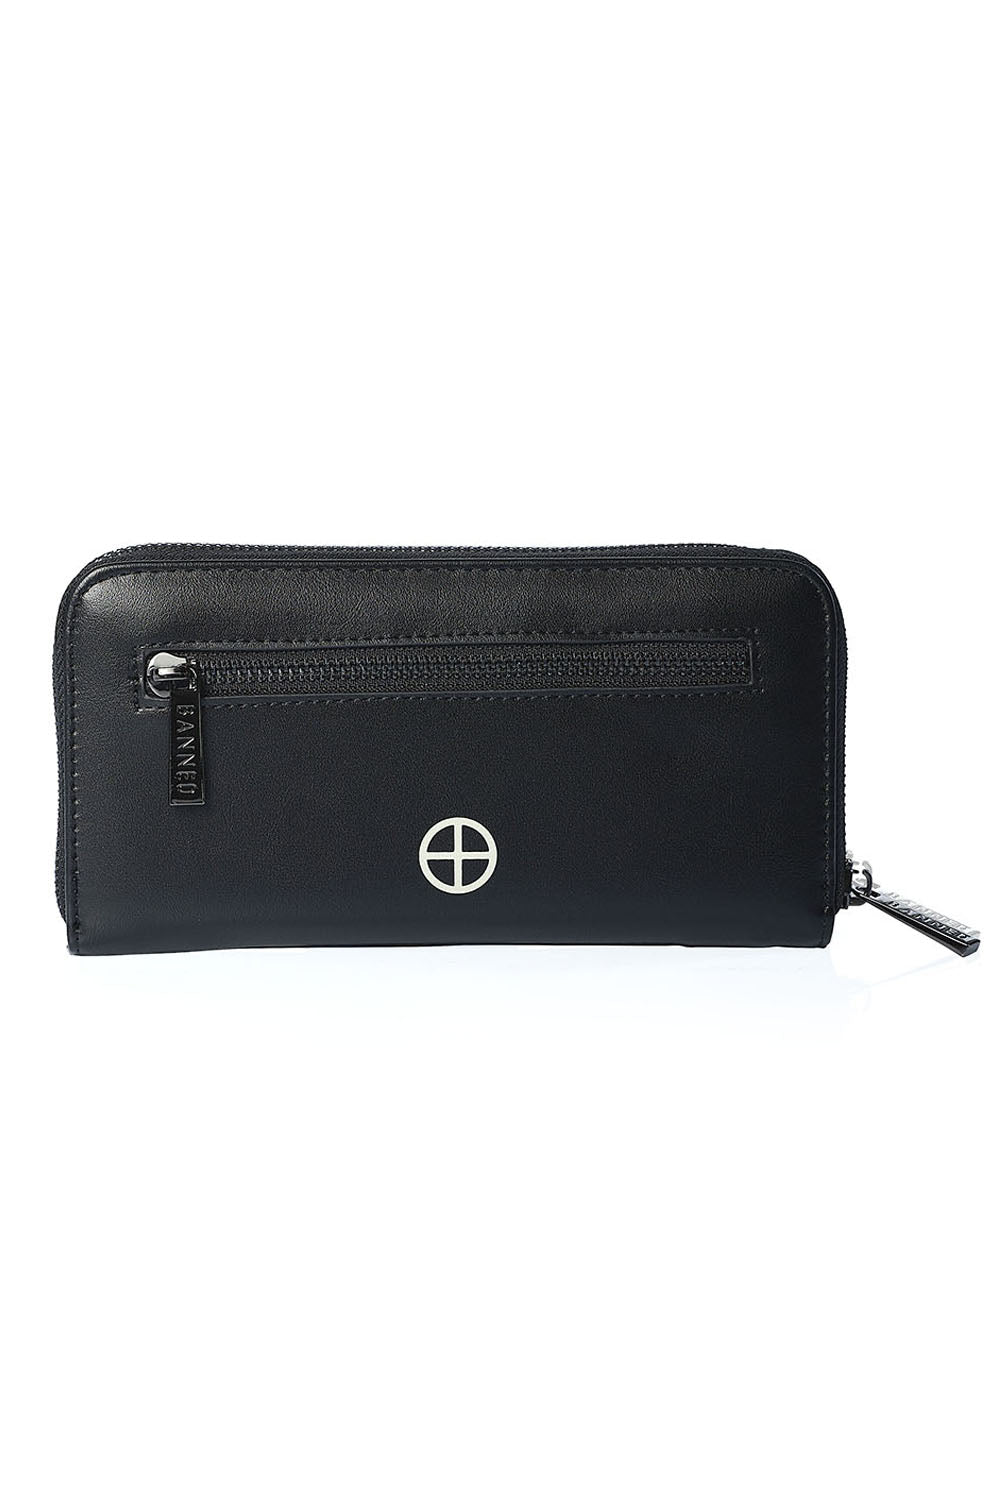 Banned Apparel Hollow Wallet